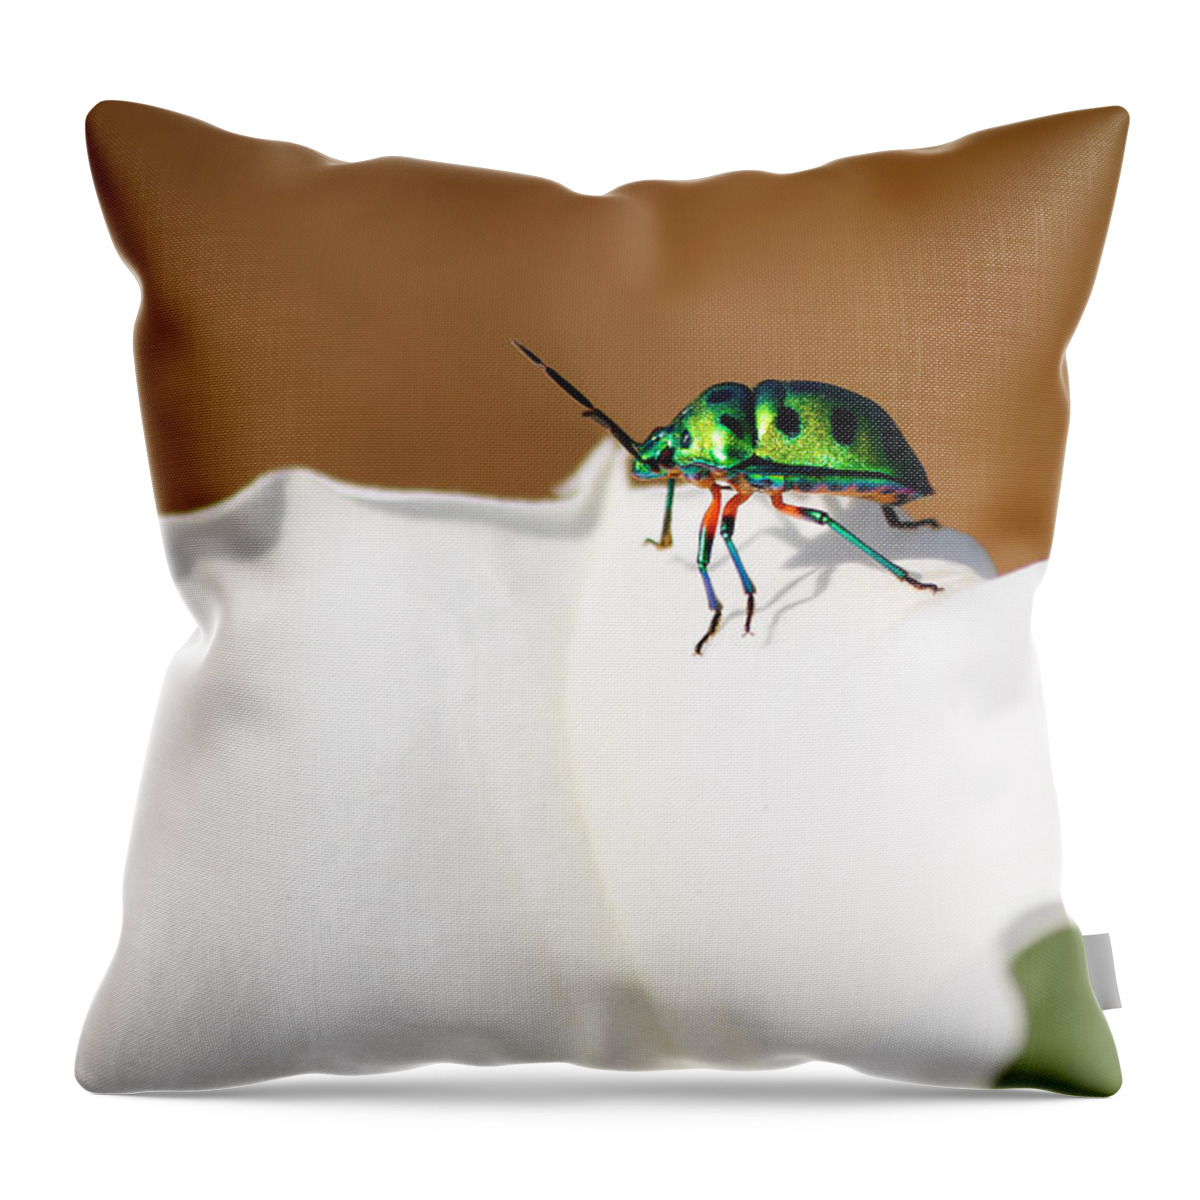 Jewel Bug Throw Pillow featuring the photograph Bejewelled by SAURAVphoto Online Store